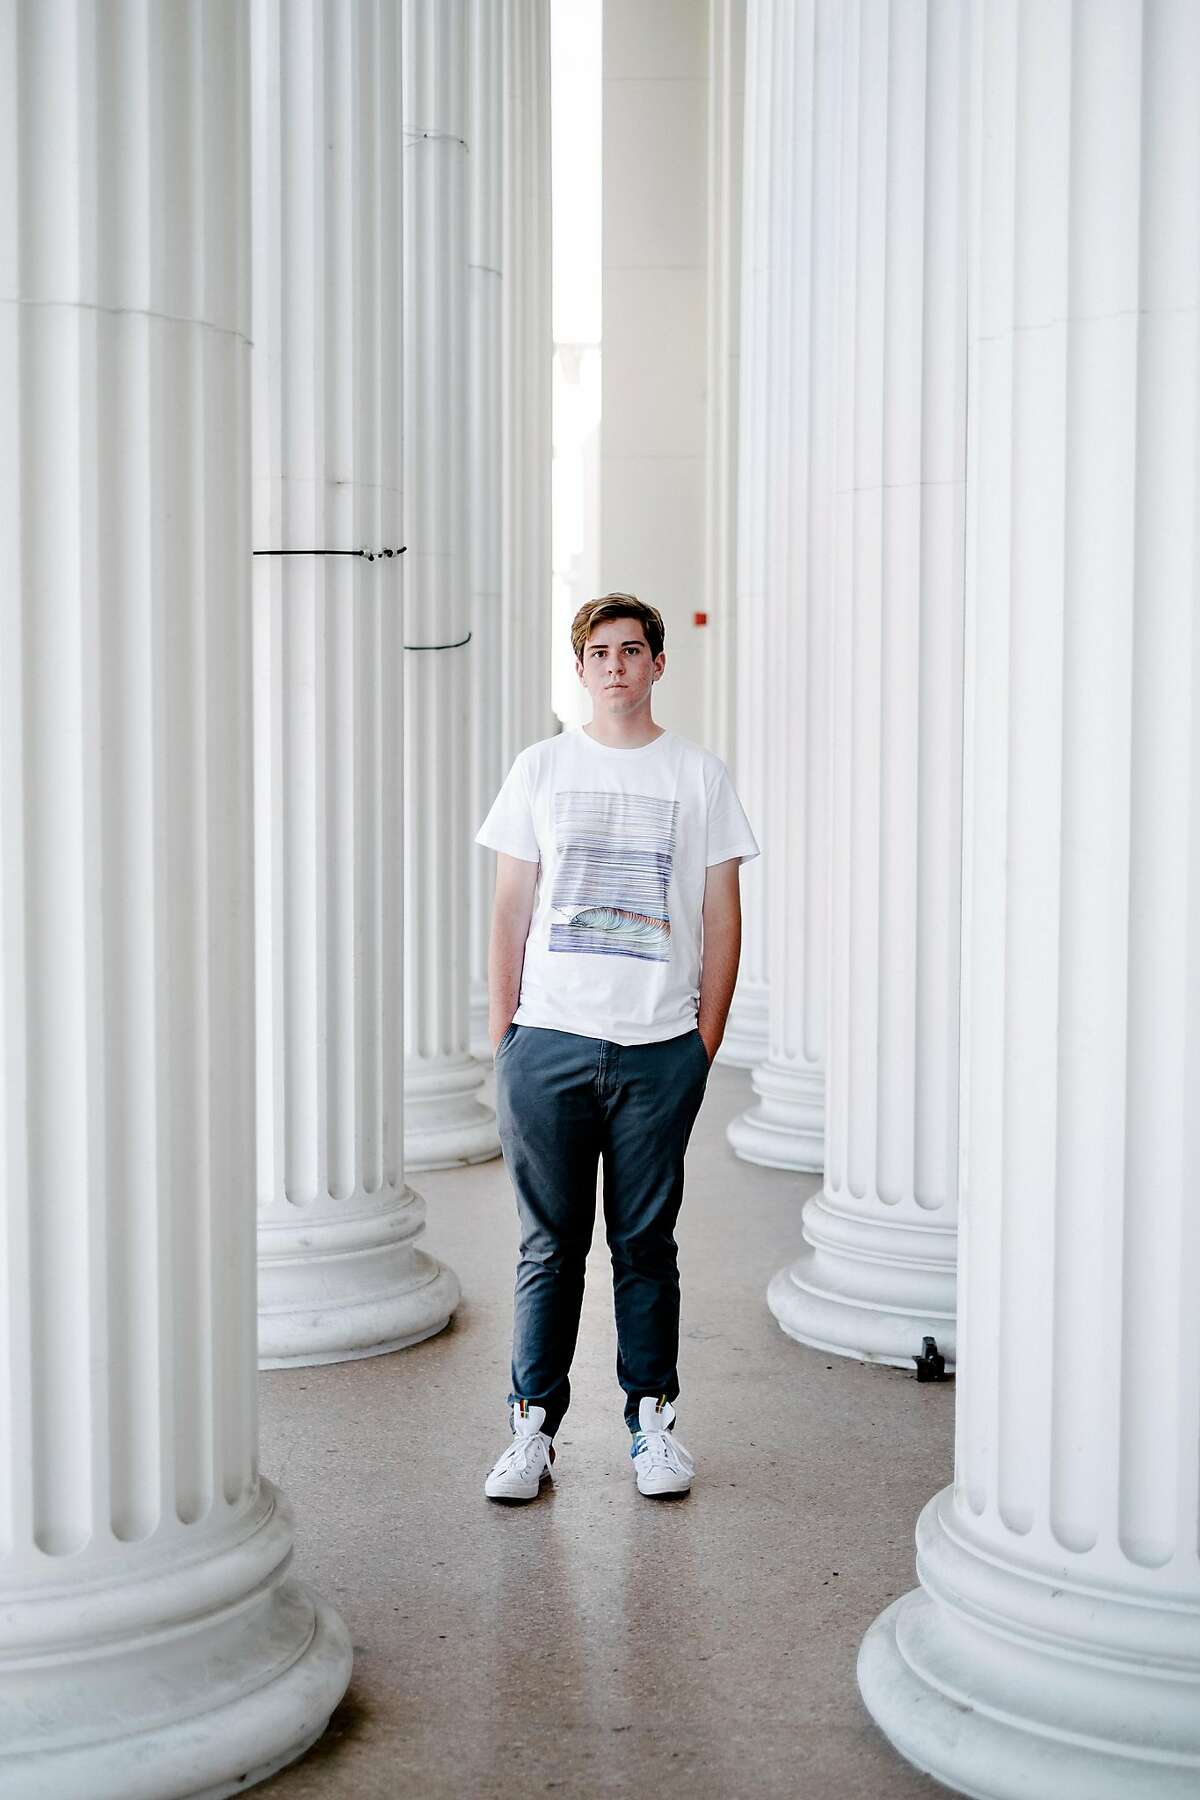 Henry Mills, who will be in the eleventh grade in the fall, stands for a portrait at Alameda High School in Alameda, Calif, on Thursday, July 16th, 2019.